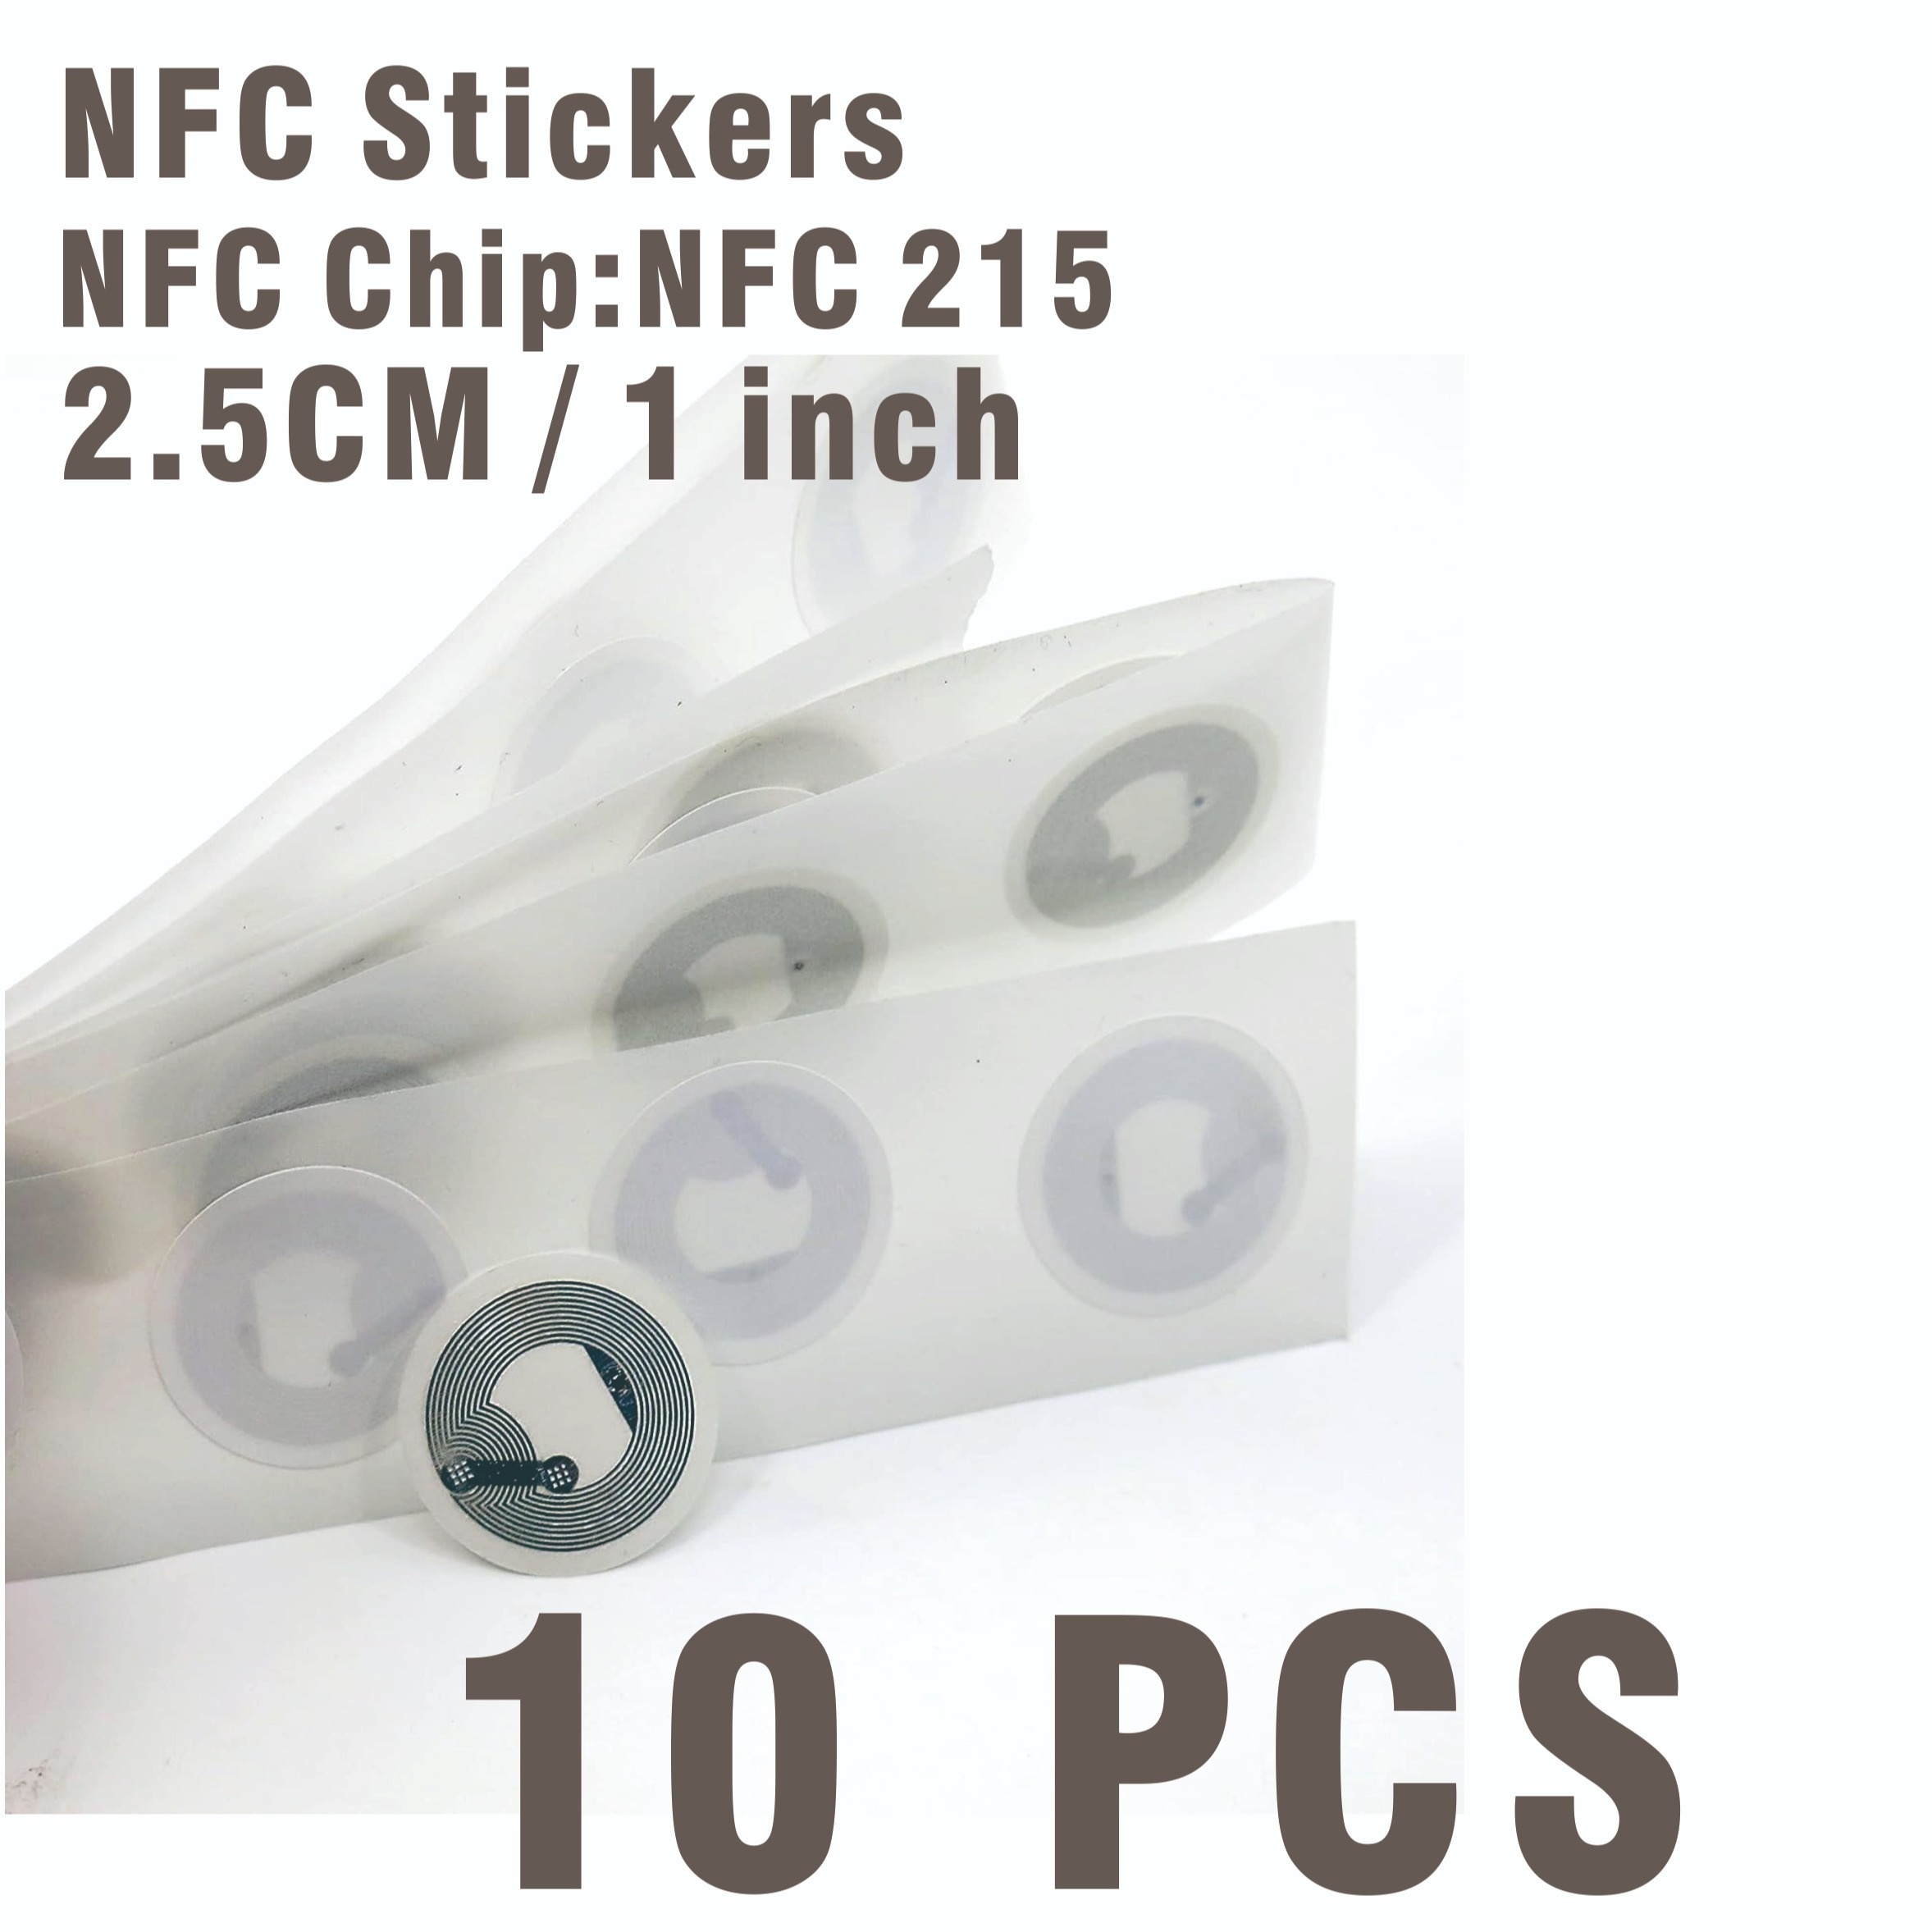 10pcs NFC Stickers Black NFC Tags NTAG215 NFC Sticker Tags 25MM Black NFC  Stickers 504 Bytes Memory Programmable NFC Tags Compatible with Android iOS